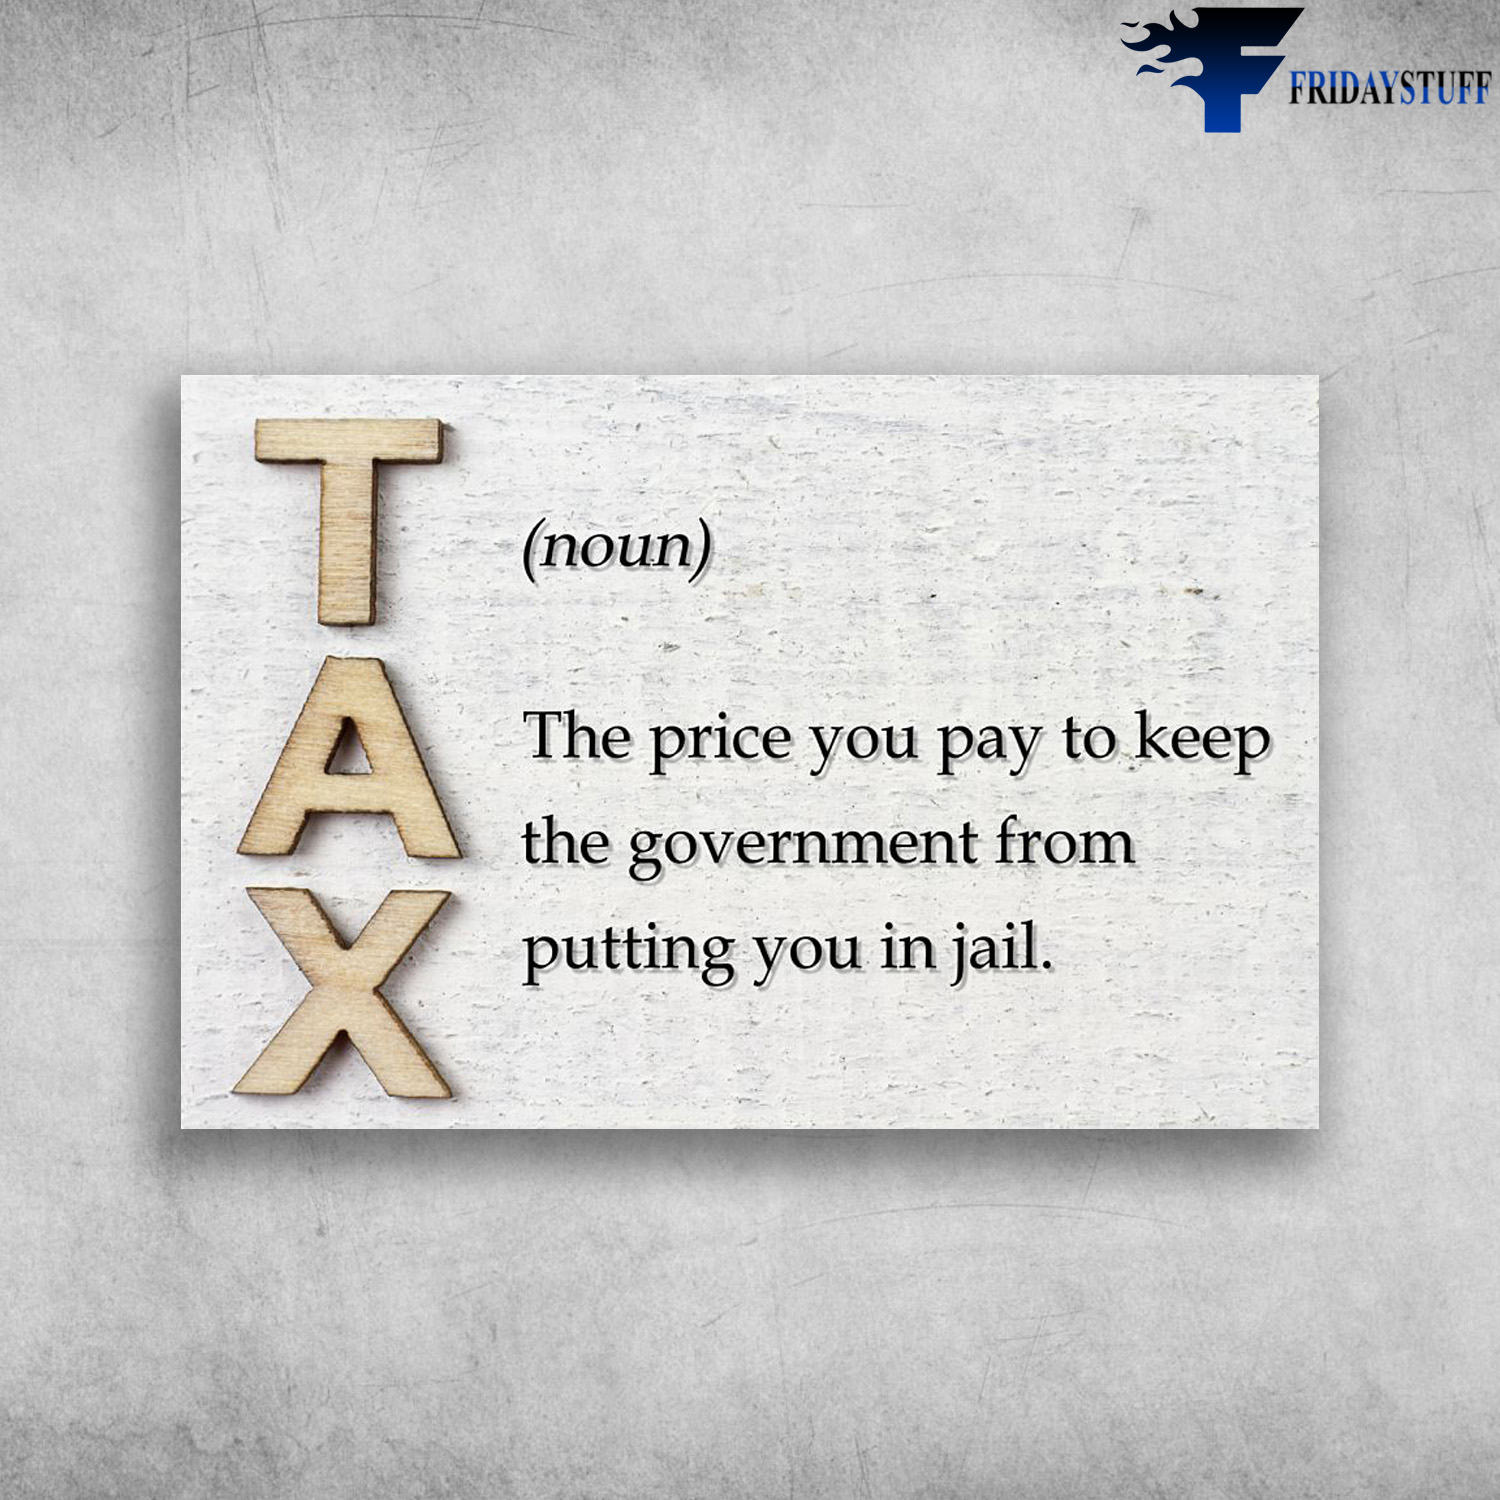 TAX Definition - The Price You Pay To Keep The Government From Putting You In Jail